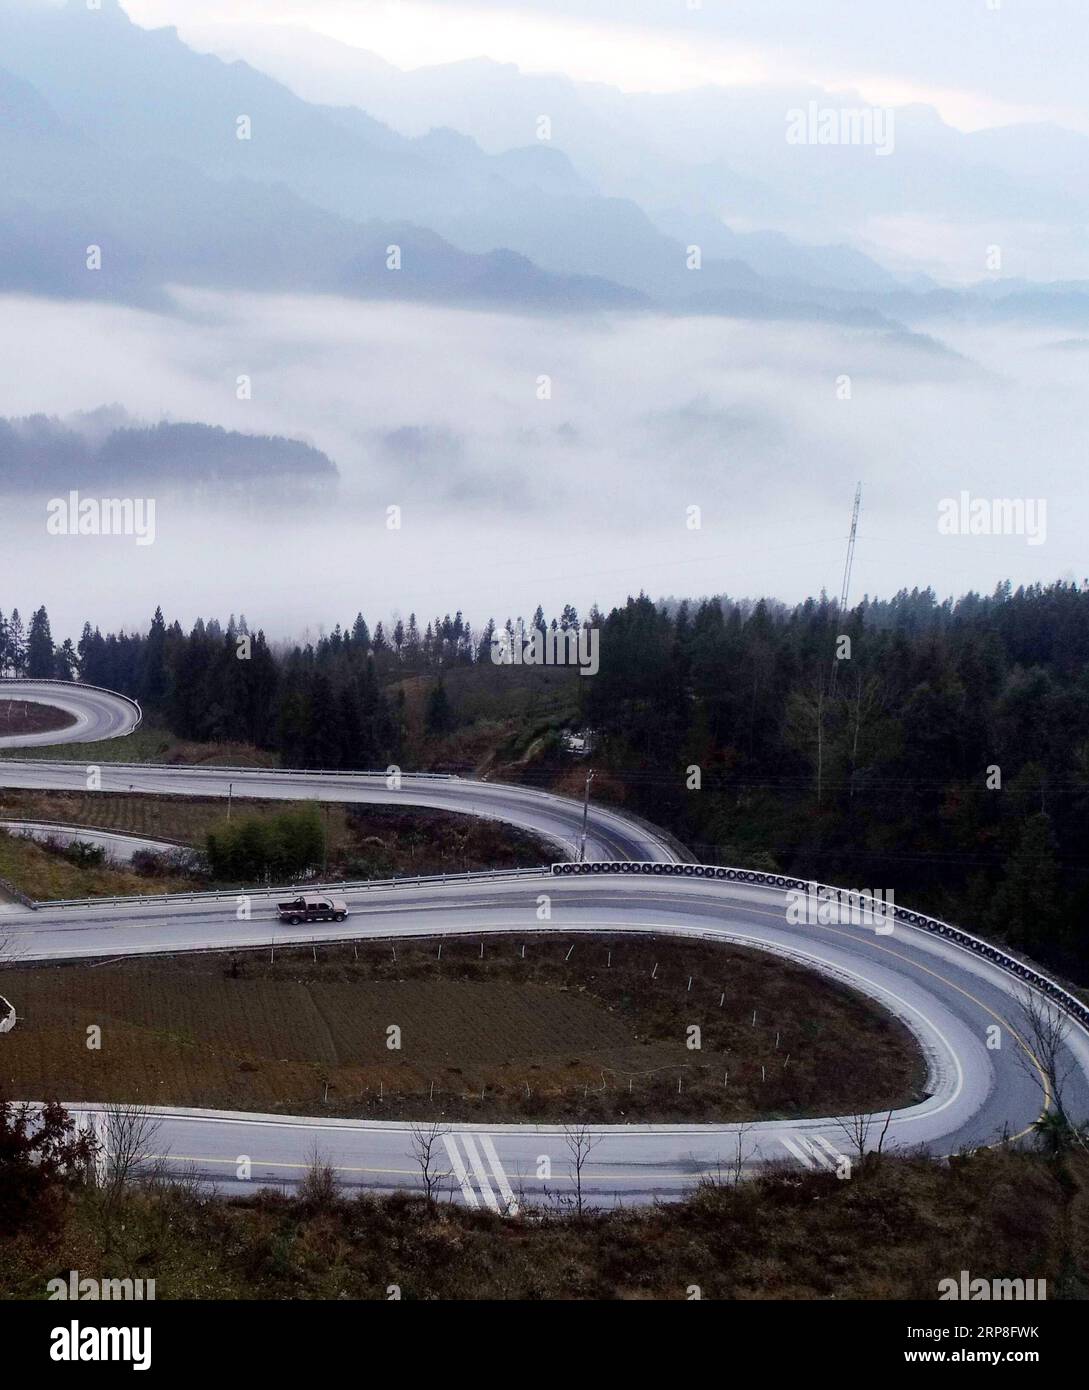 (190304) -- ENSHI, March 4, 2019 (Xinhua) -- Aerial photo taken on March 4, 2019 shows a car driving on the Shidaguai highway in Enshi, central China s Hubei Province. The Shidaguai highway, literally meaning highway with ten great curves in Chinese, is a section on the highway linking Baiyangping in central China s Hubei Province with Fengjie in southwest China s Chongqing. (Xinhua/Yang Shunpi) CHINA-HUBEI-ENSHI-HIGHWAY-CURVES (CN) PUBLICATIONxNOTxINxCHN Stock Photo